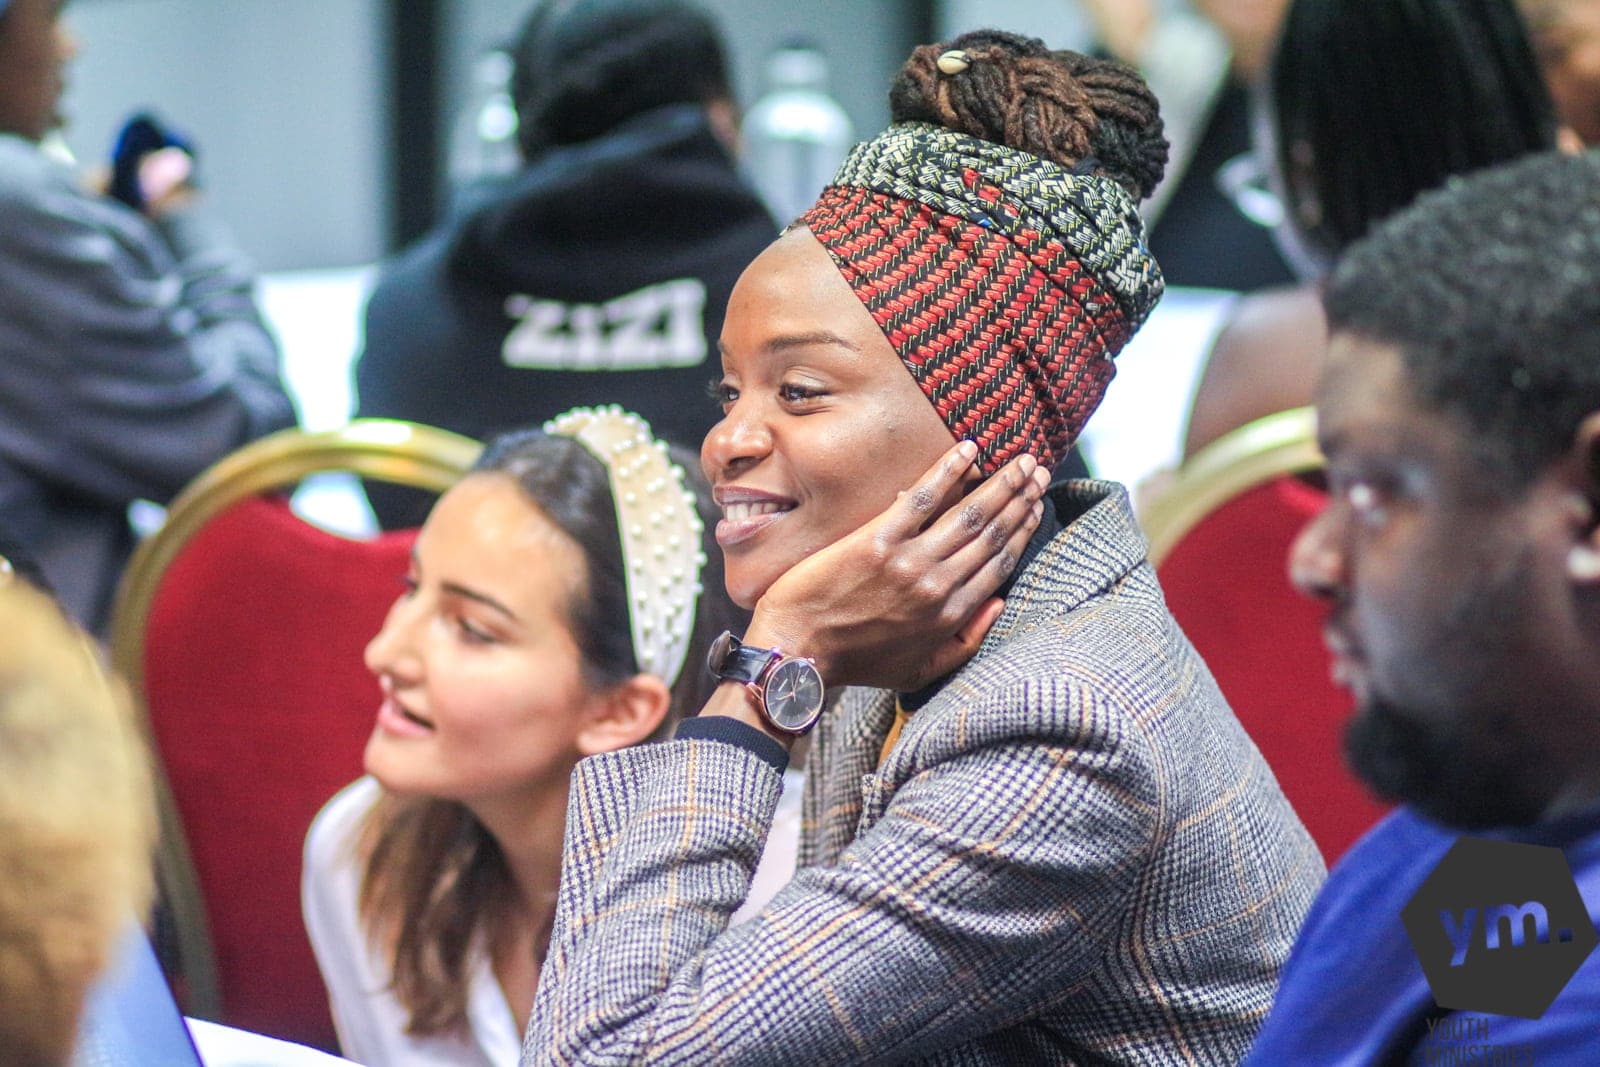 Attendees smile during presentations at the South England Conference (SEC) Youth Leadership Conference 2020 held in London. The event drew more than 60 youth leaders January 24-26, 2020. [Photo: Aaron Fenton-Hewitt]